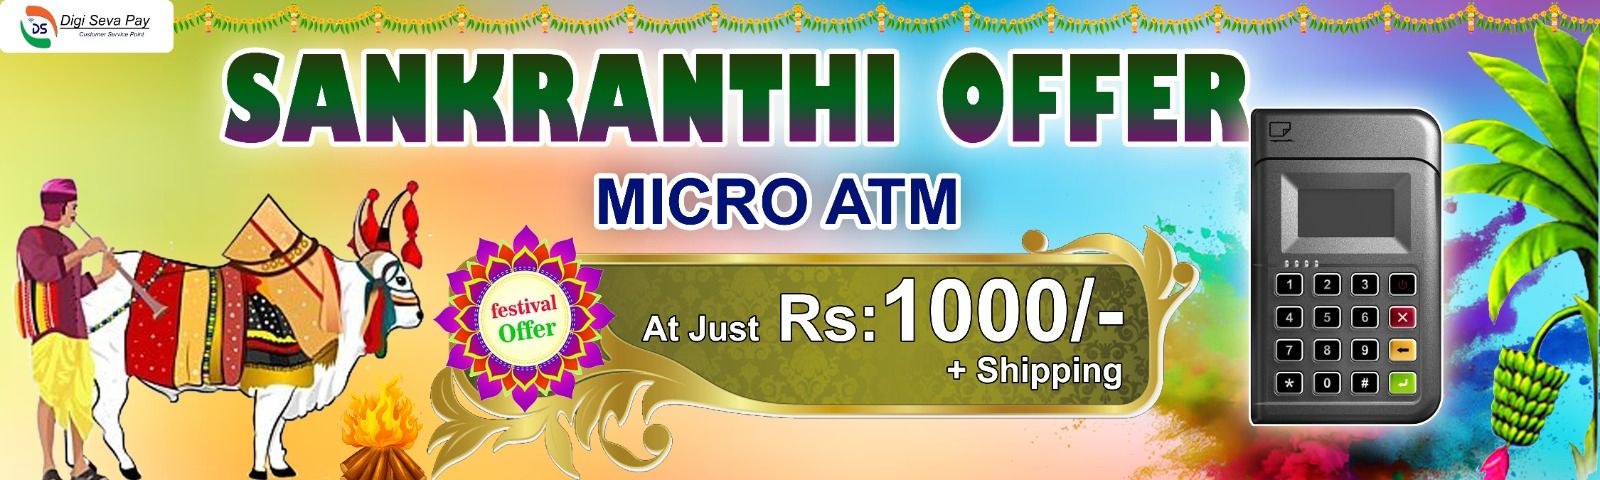 Micro Atm cost only 1000 digi seva pay special offer